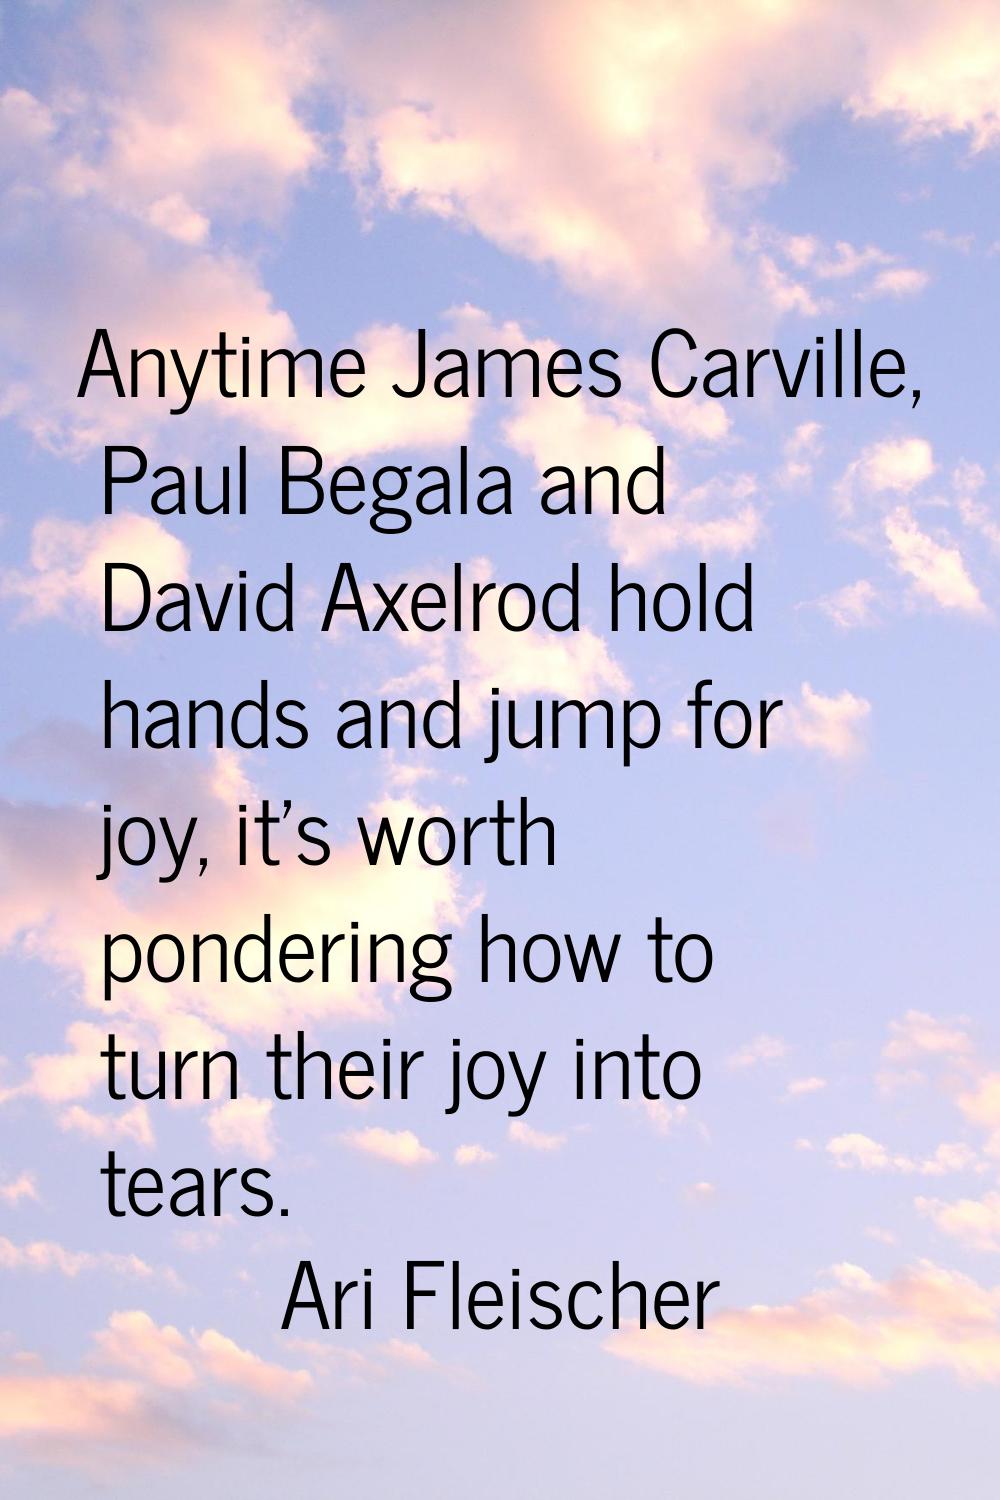 Anytime James Carville, Paul Begala and David Axelrod hold hands and jump for joy, it's worth ponde